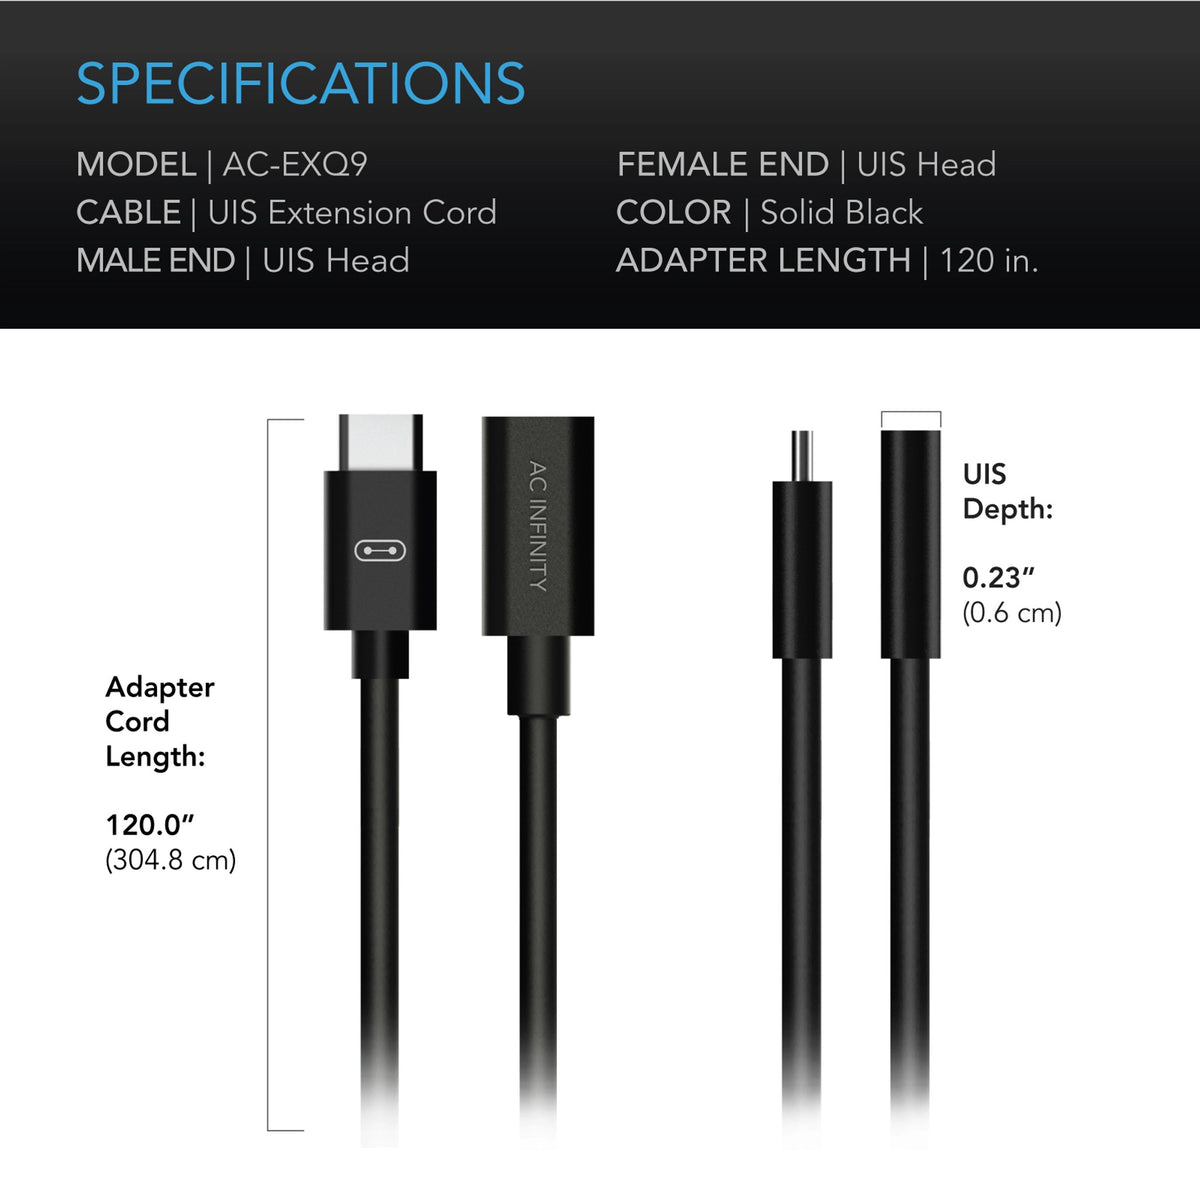 UIS Extension cable specifications